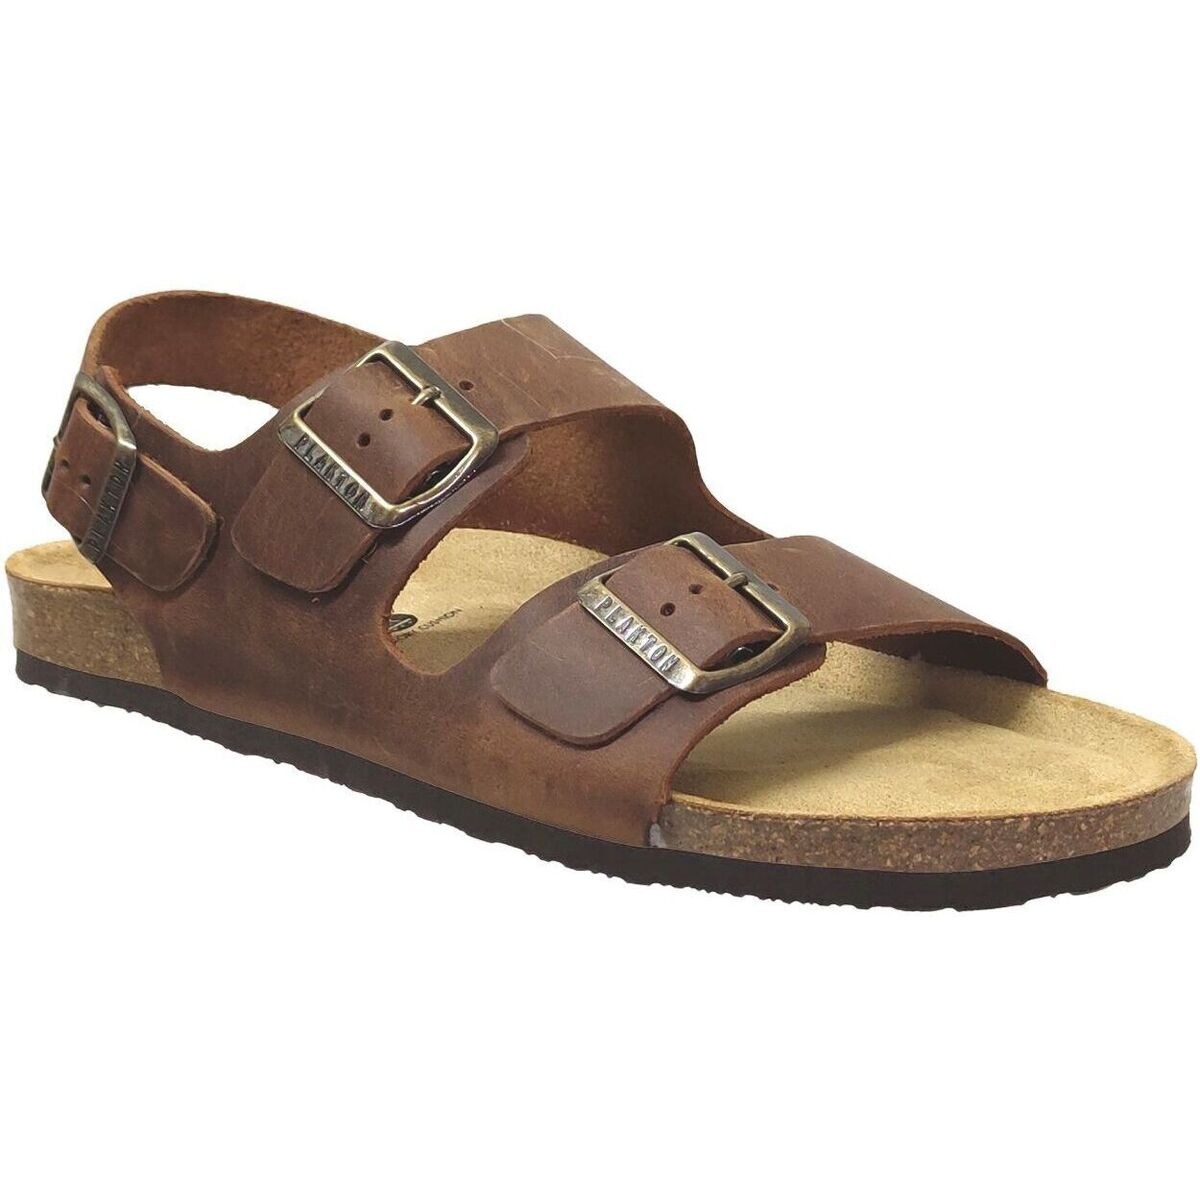 Plakton Gents Sandals in Brown from Spartoo GOOFASH